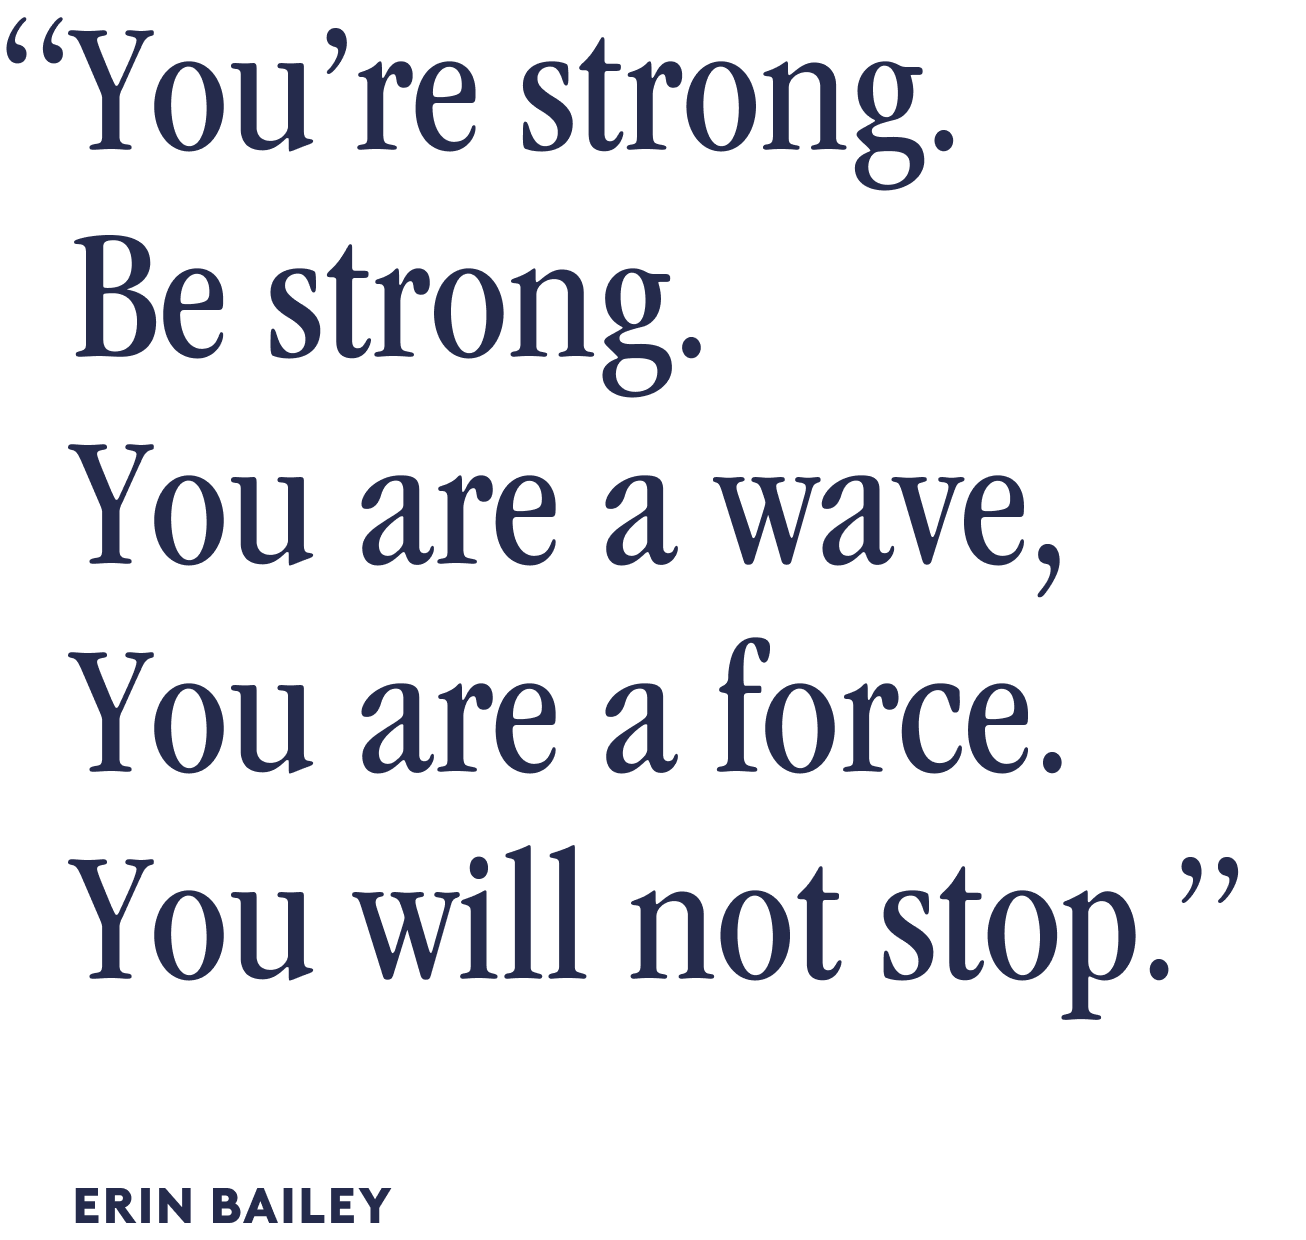 You’re strong. Be Strong. You are a wave, you are a force. you will not stop. - Erin Bailey